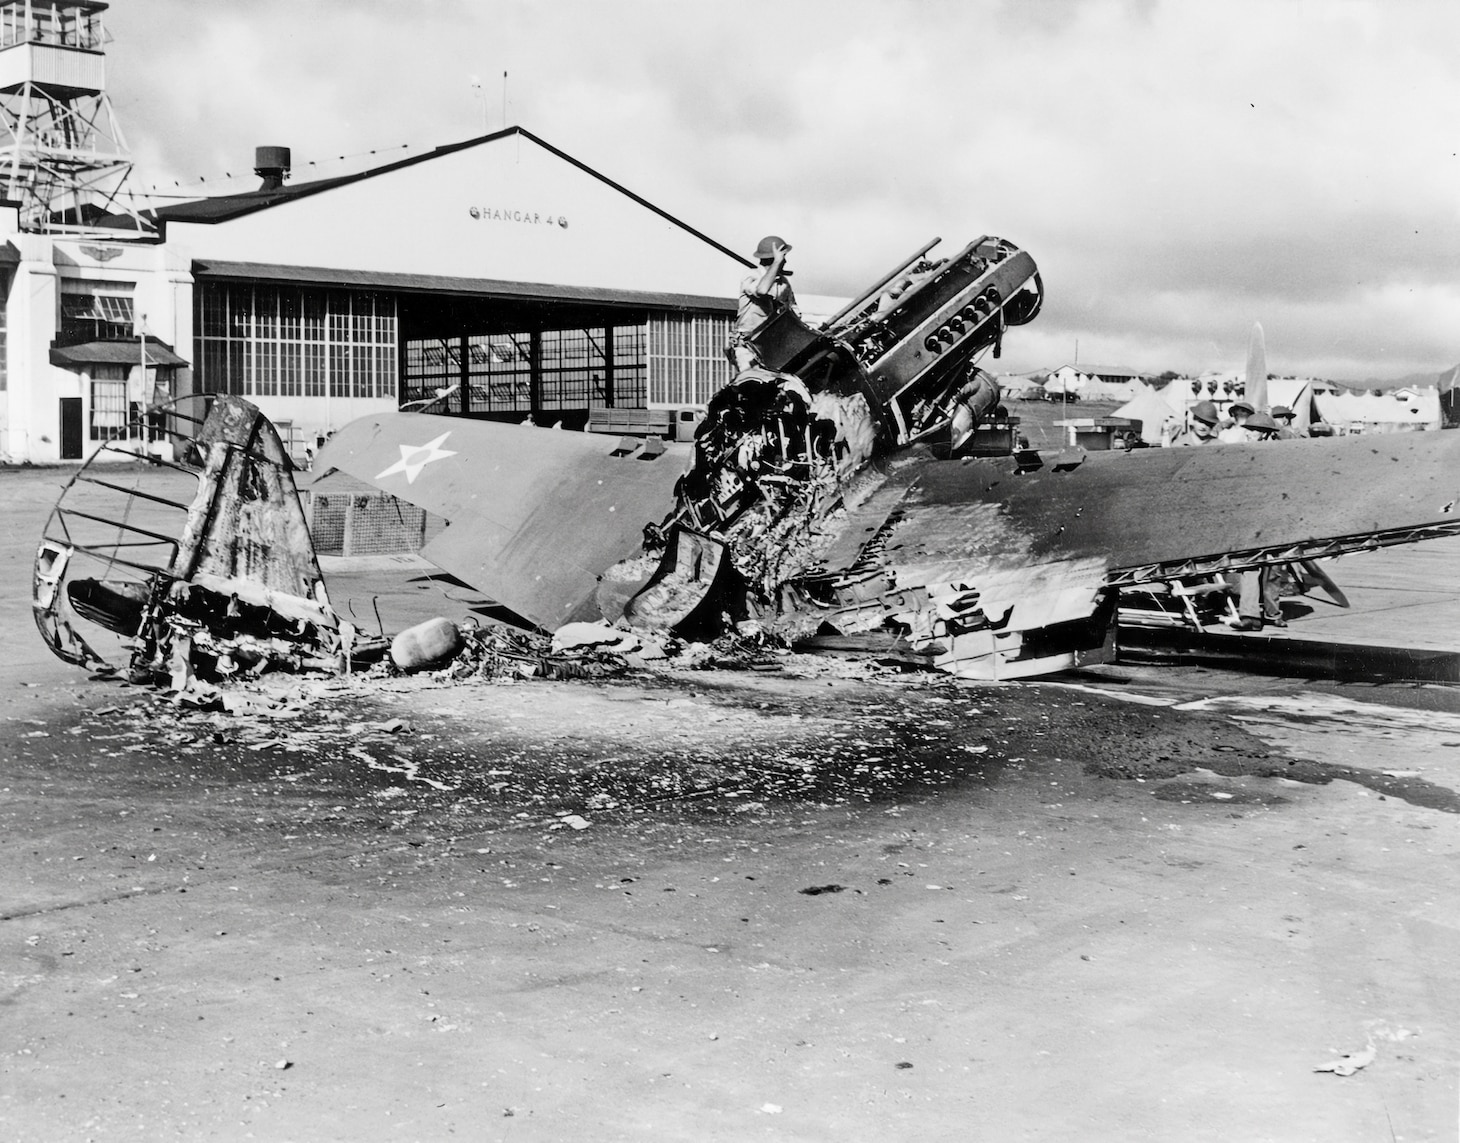 Men examine the burned-out wreckage of a P-40 fighter, possibly from the 78th Pursuit Squadron near Hangar 4 at Wheeler Air Field, following the end of the Japanese raid. Note the long blast tubes for the aircraft’s two .50-caliber nose machine guns. The early P-40s also had four wing-mounted .30-caliber machine guns. Before the raid, there were 99 P-40s available from various squadrons around the several bases. By day’s end, only 27 remained operational.